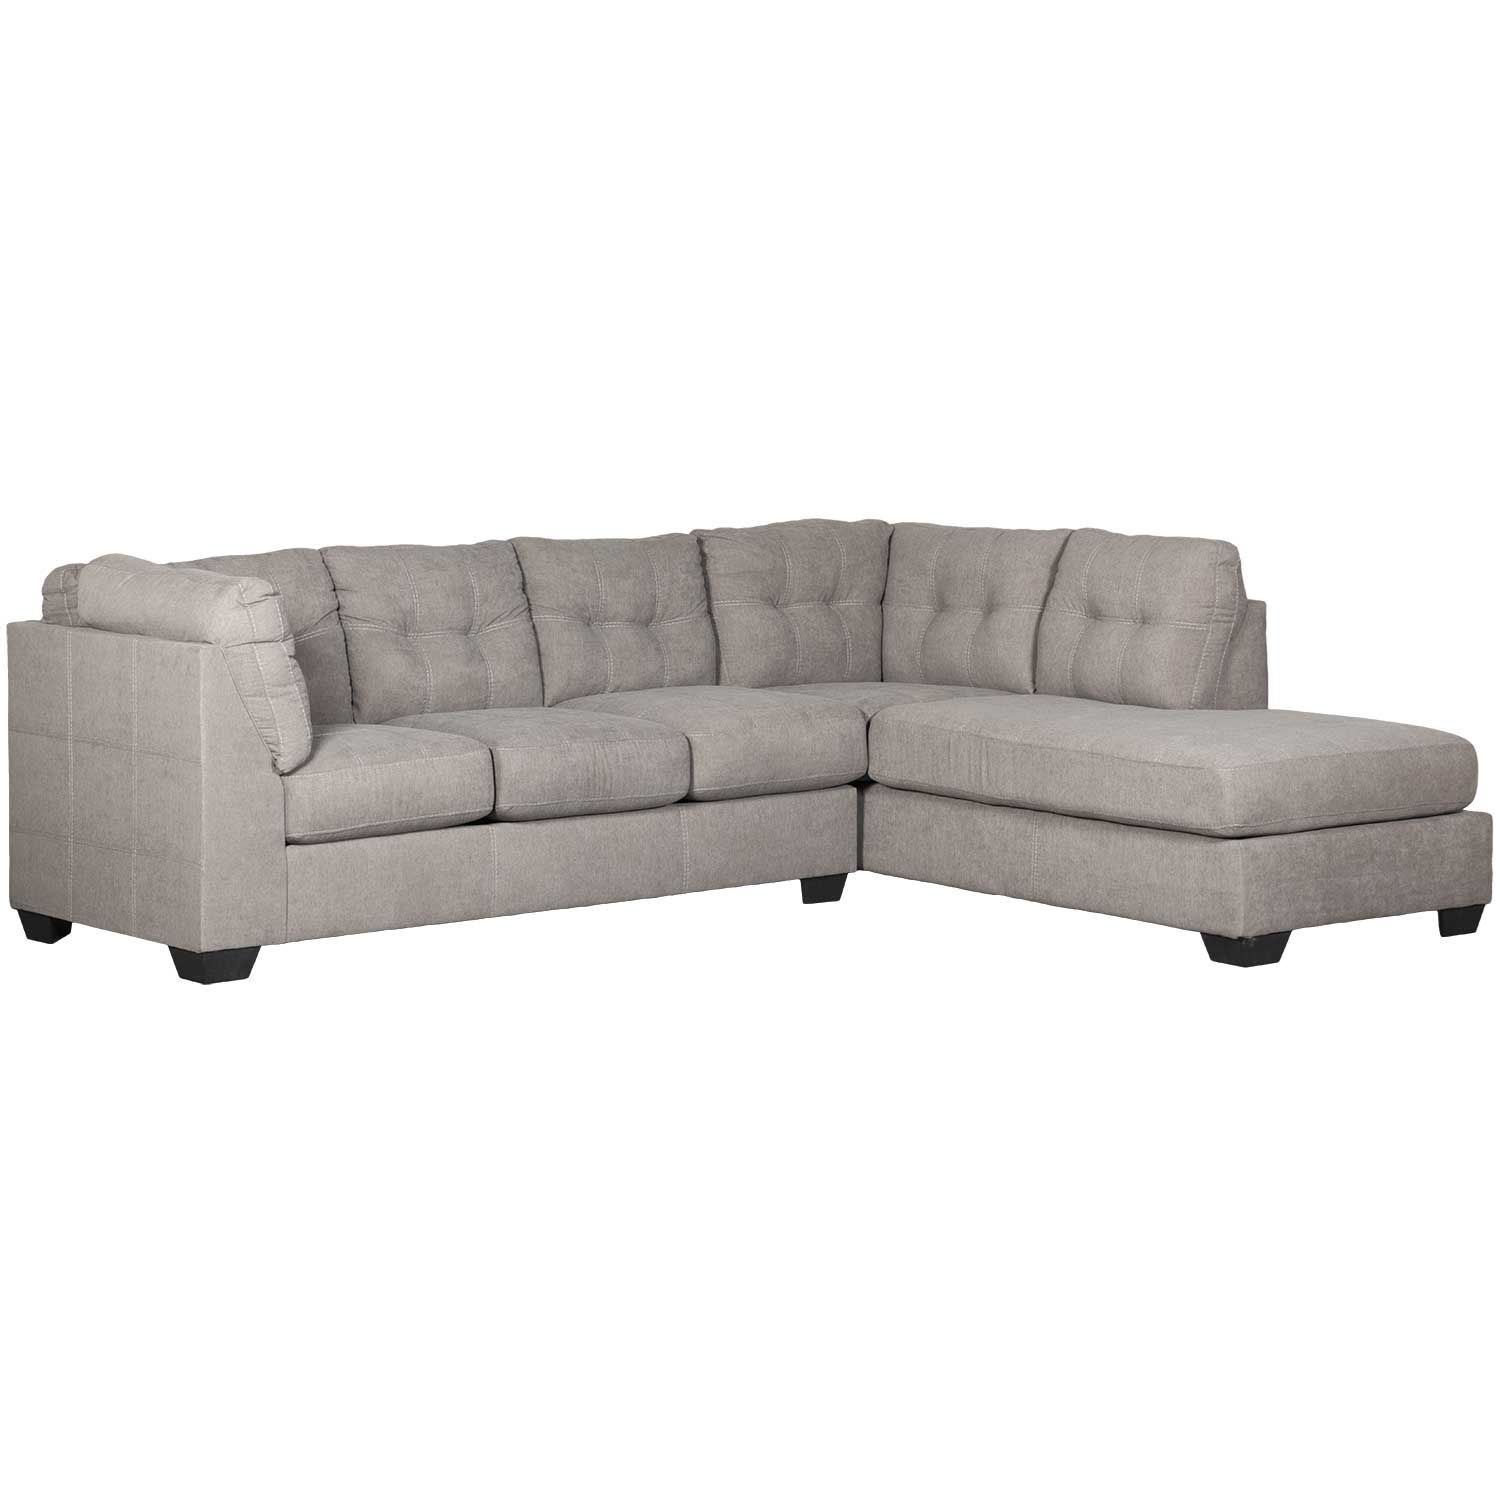 Maier Charcoal 2 Piece Sectional With Raf Chaise Inside 2pc Burland Contemporary Sectional Sofas Charcoal (Photo 11 of 15)